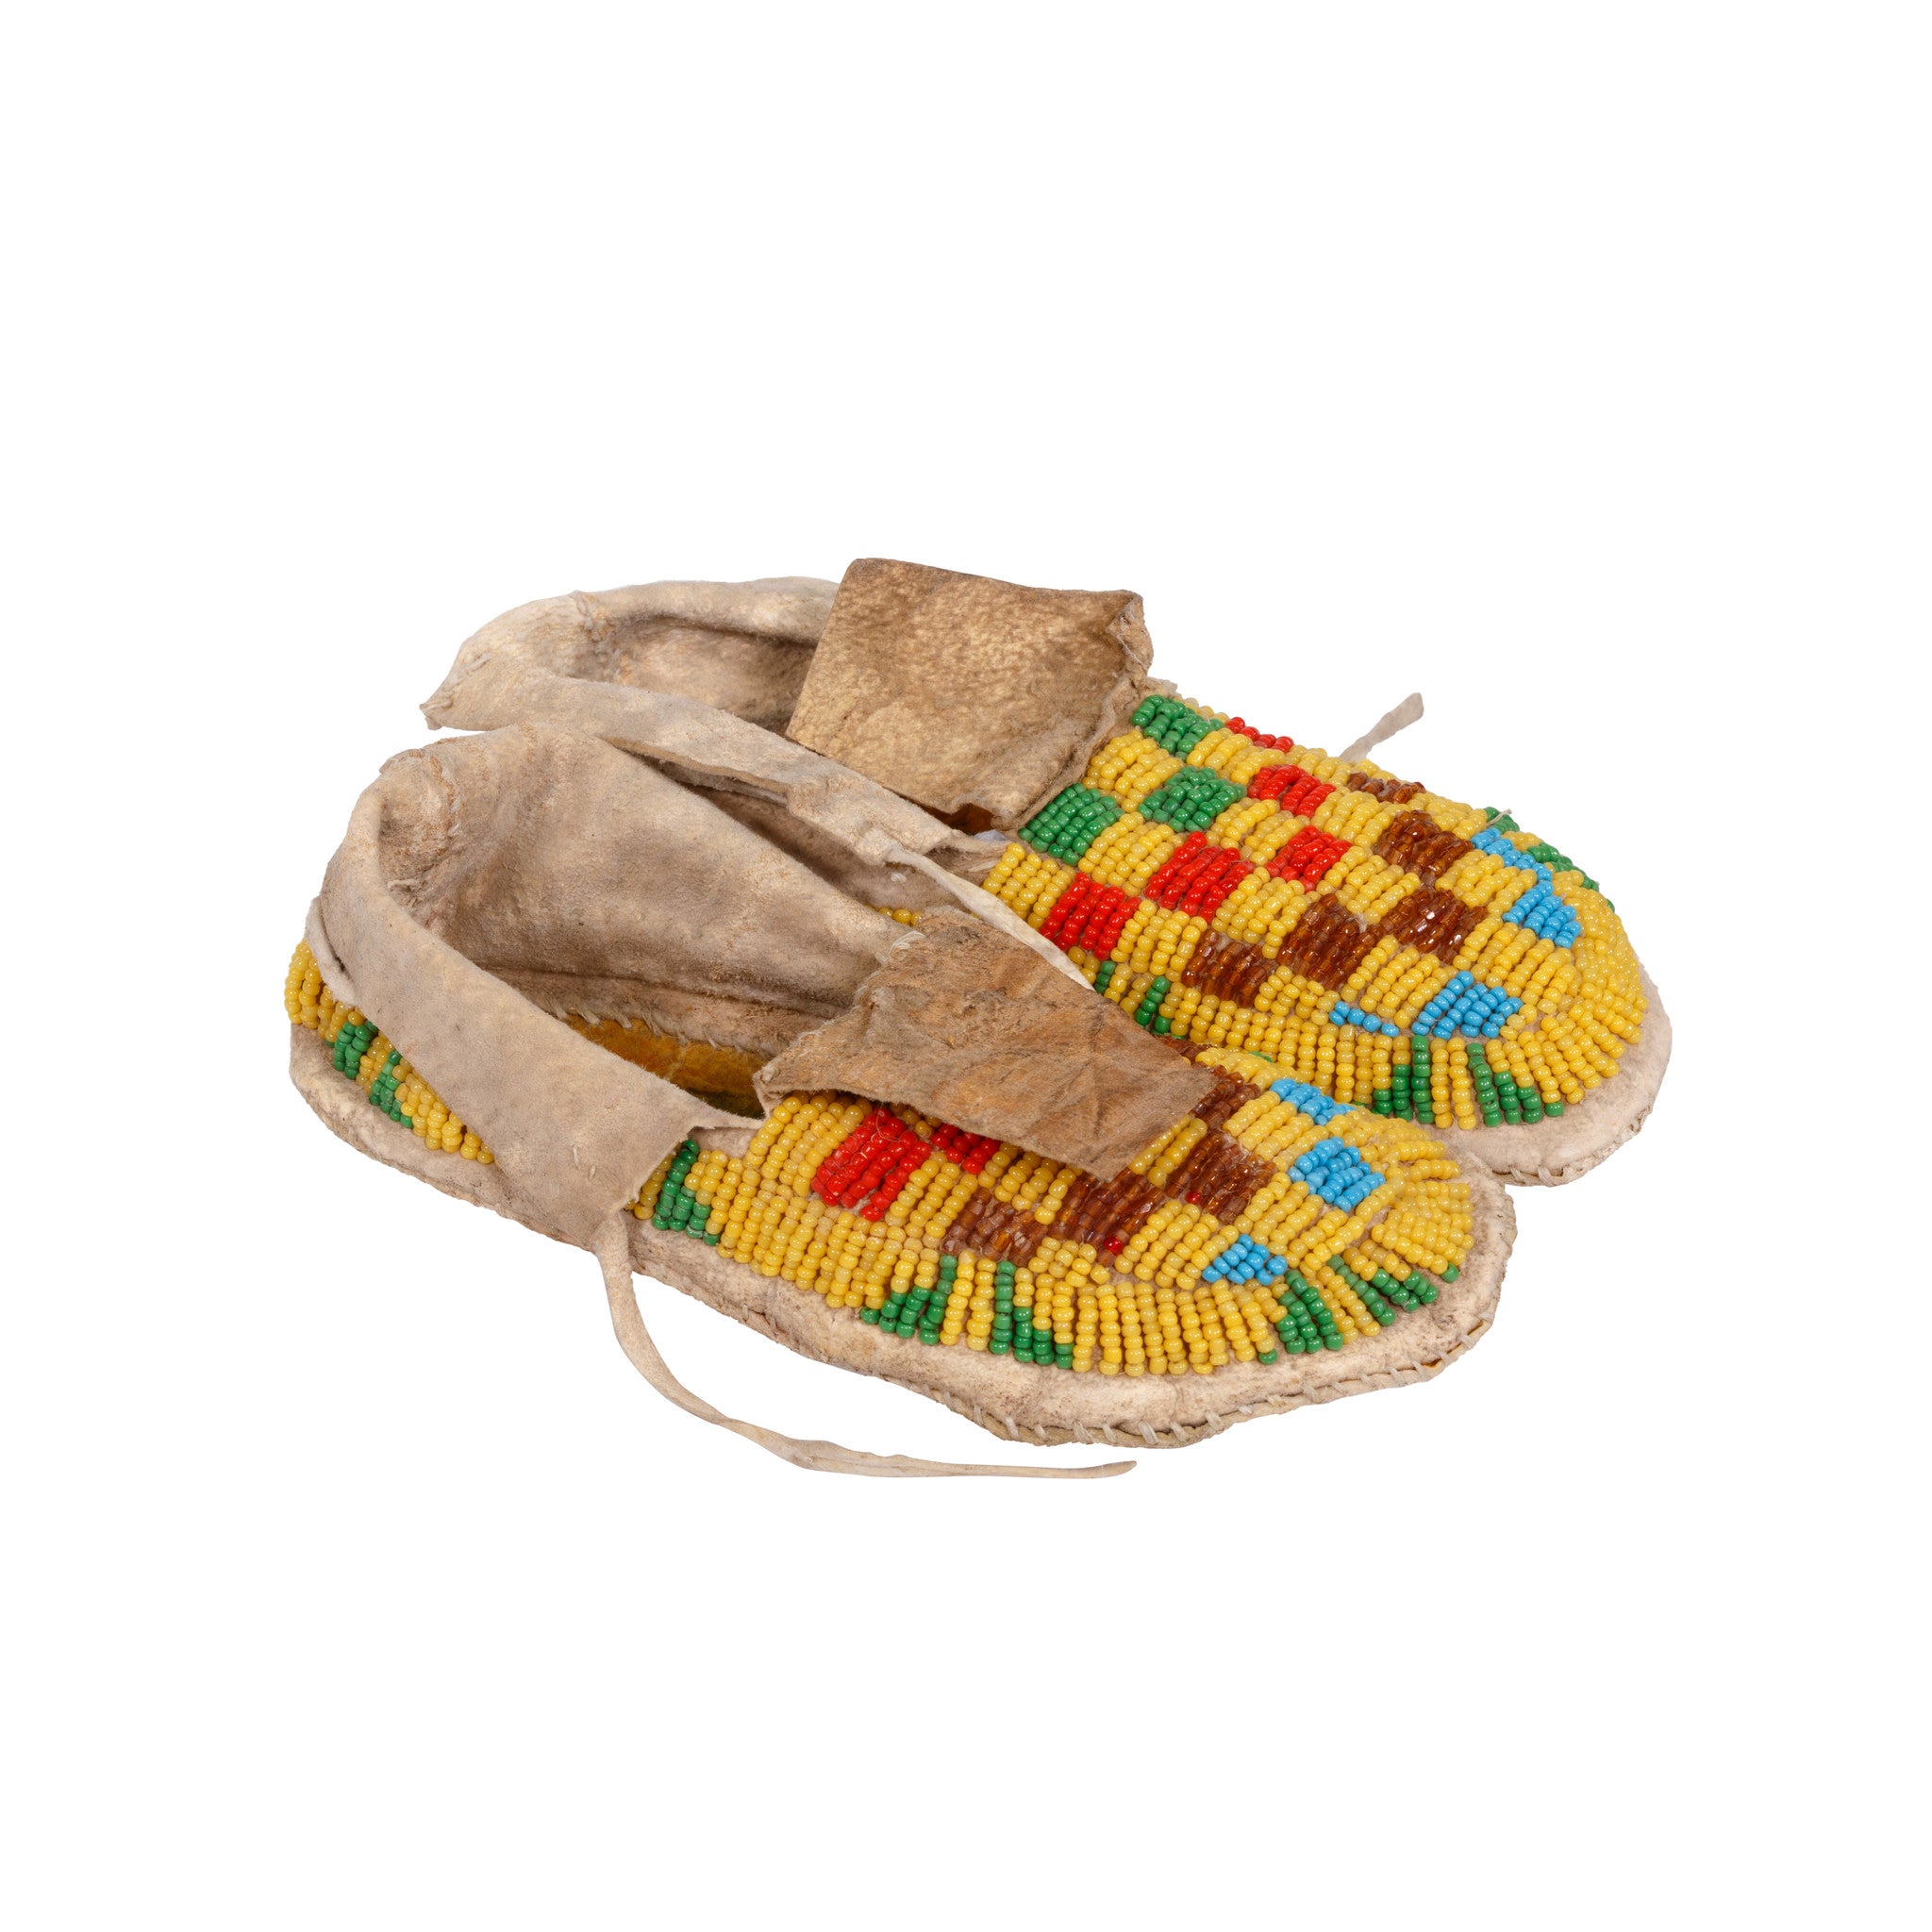 Sioux Child’s Moccasins